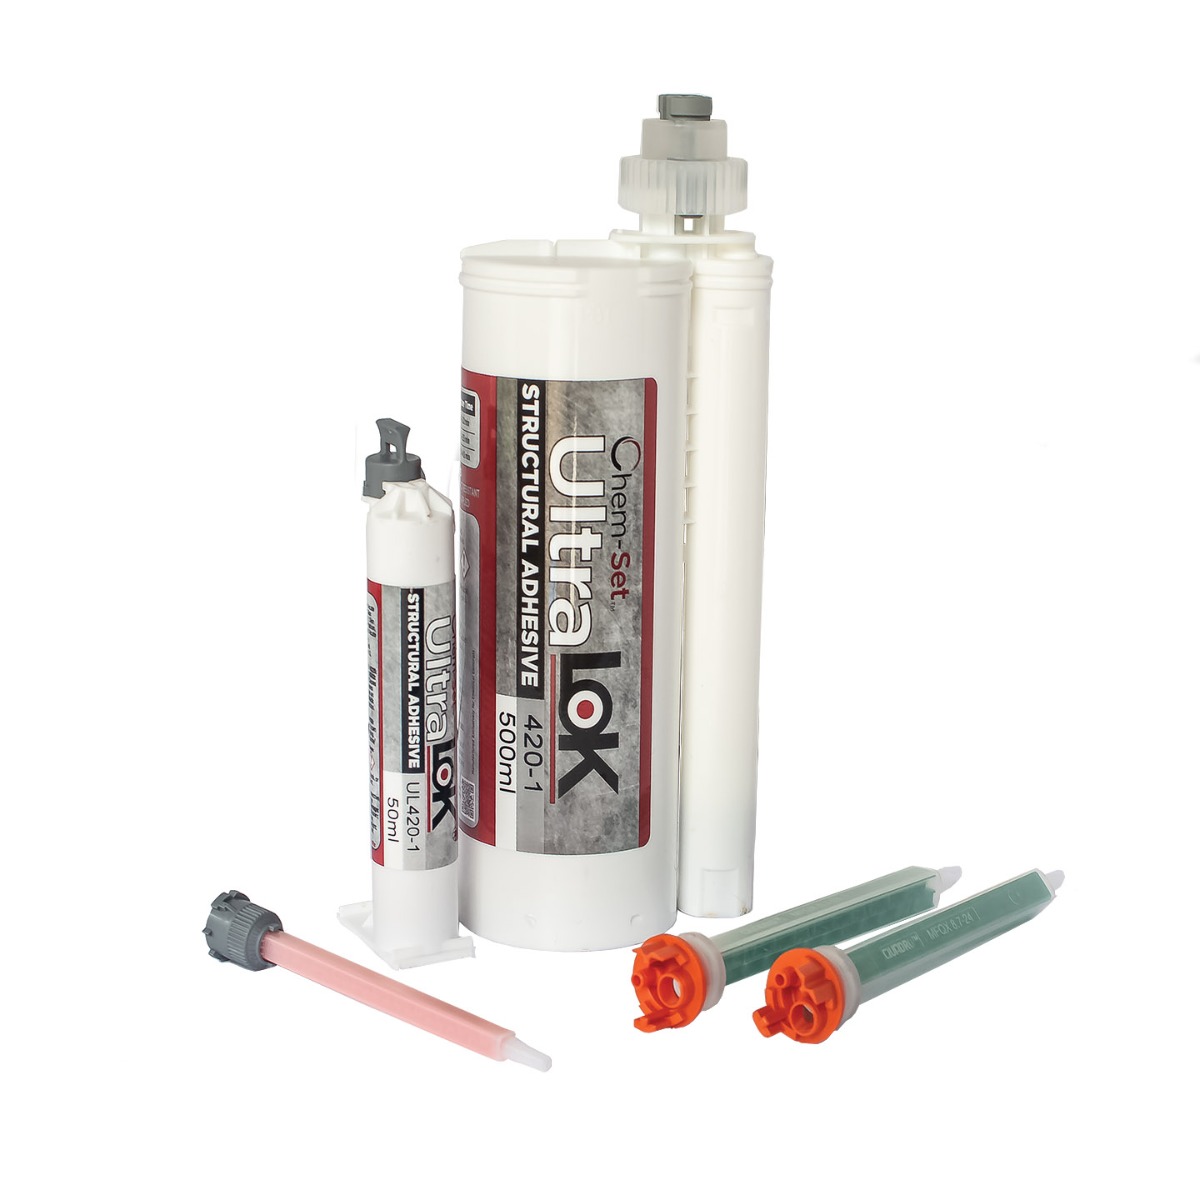 UltraLok 420-1 Structural MMA Adhesive